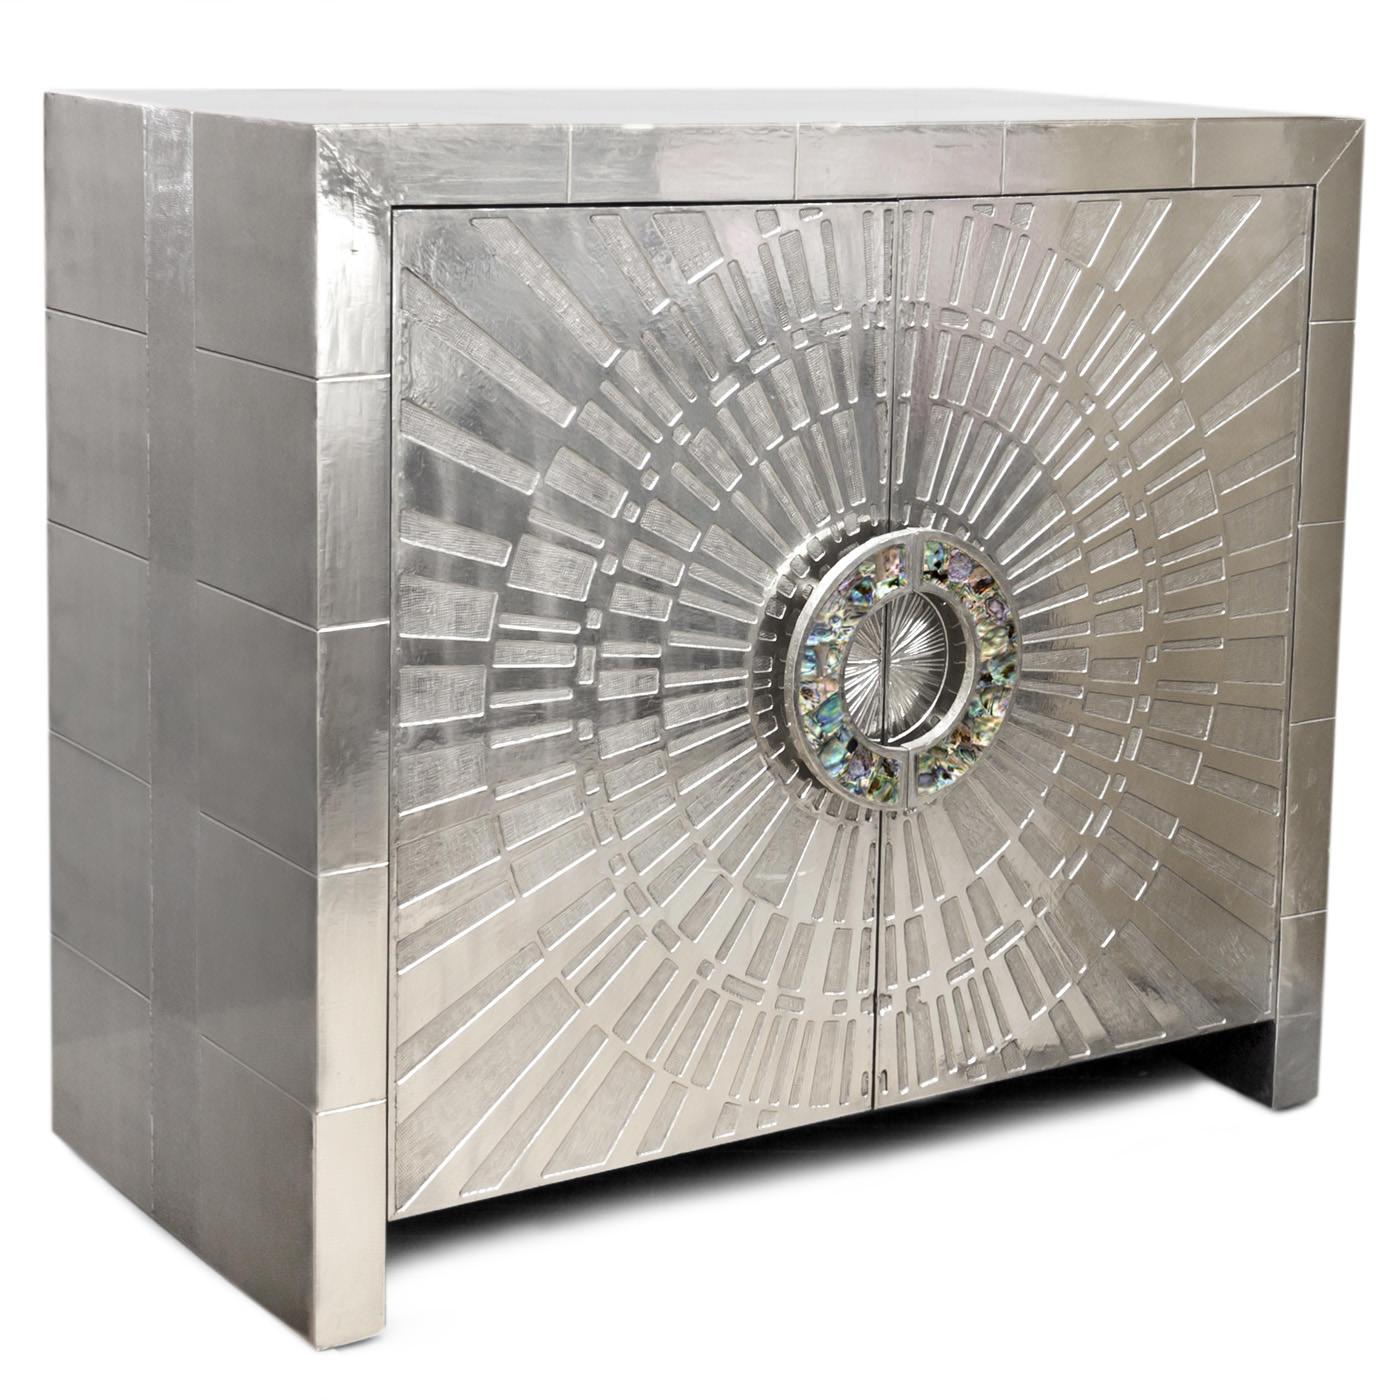 Our Talitha collection is crafted from nickel-plated metal with hand-stamped patterns applied to minimalist, modernist forms. The surface is reminiscent of silver leaf it emits that same lustrous glow—but is wonderfully durable.

Our Talitha console